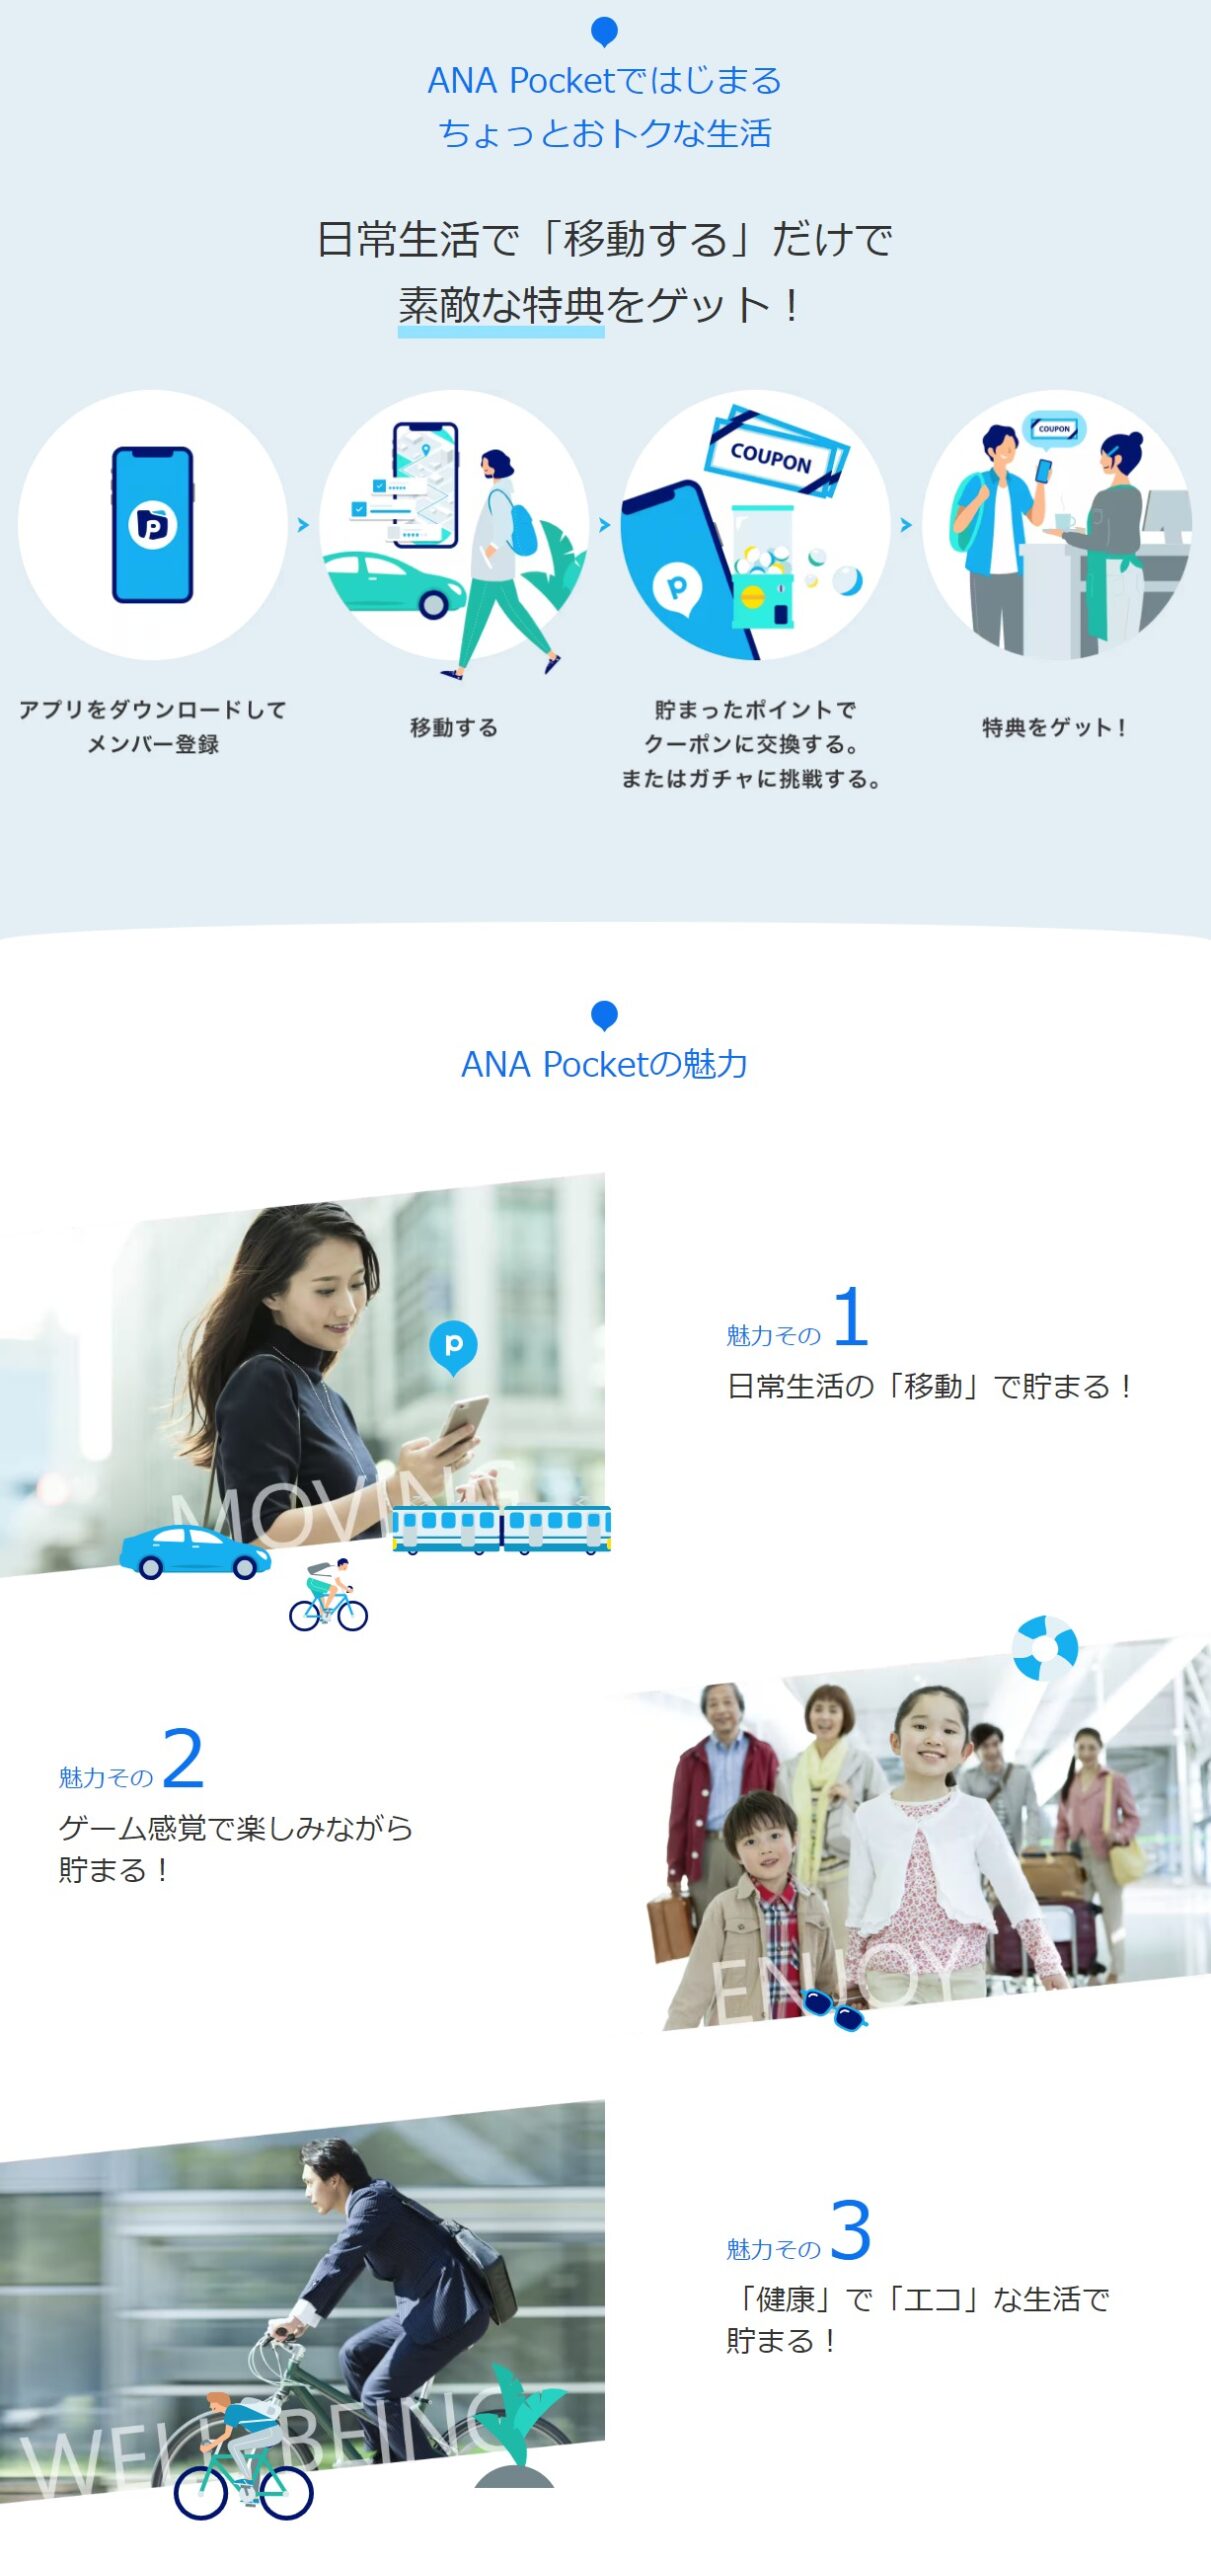 ANApocket 紹介リンク https://anapocket.page.link/Vo7ErHQGRCdWrdXE6